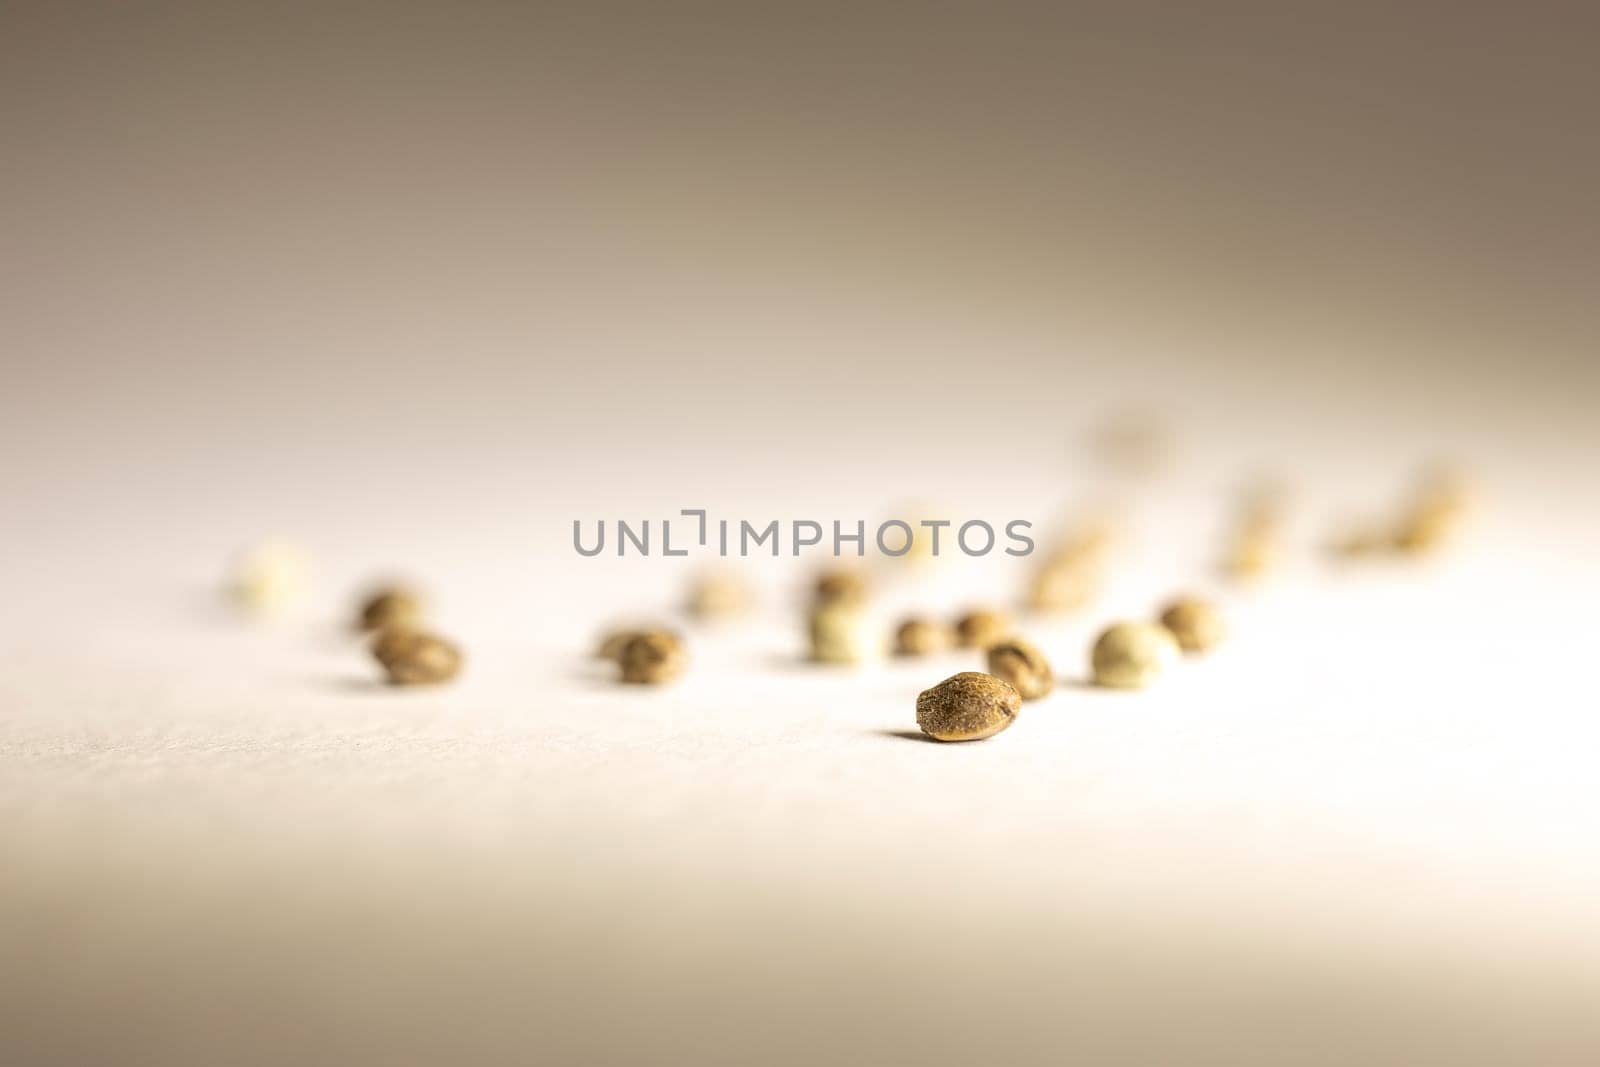 cannabis seeds are scattered on a white background.